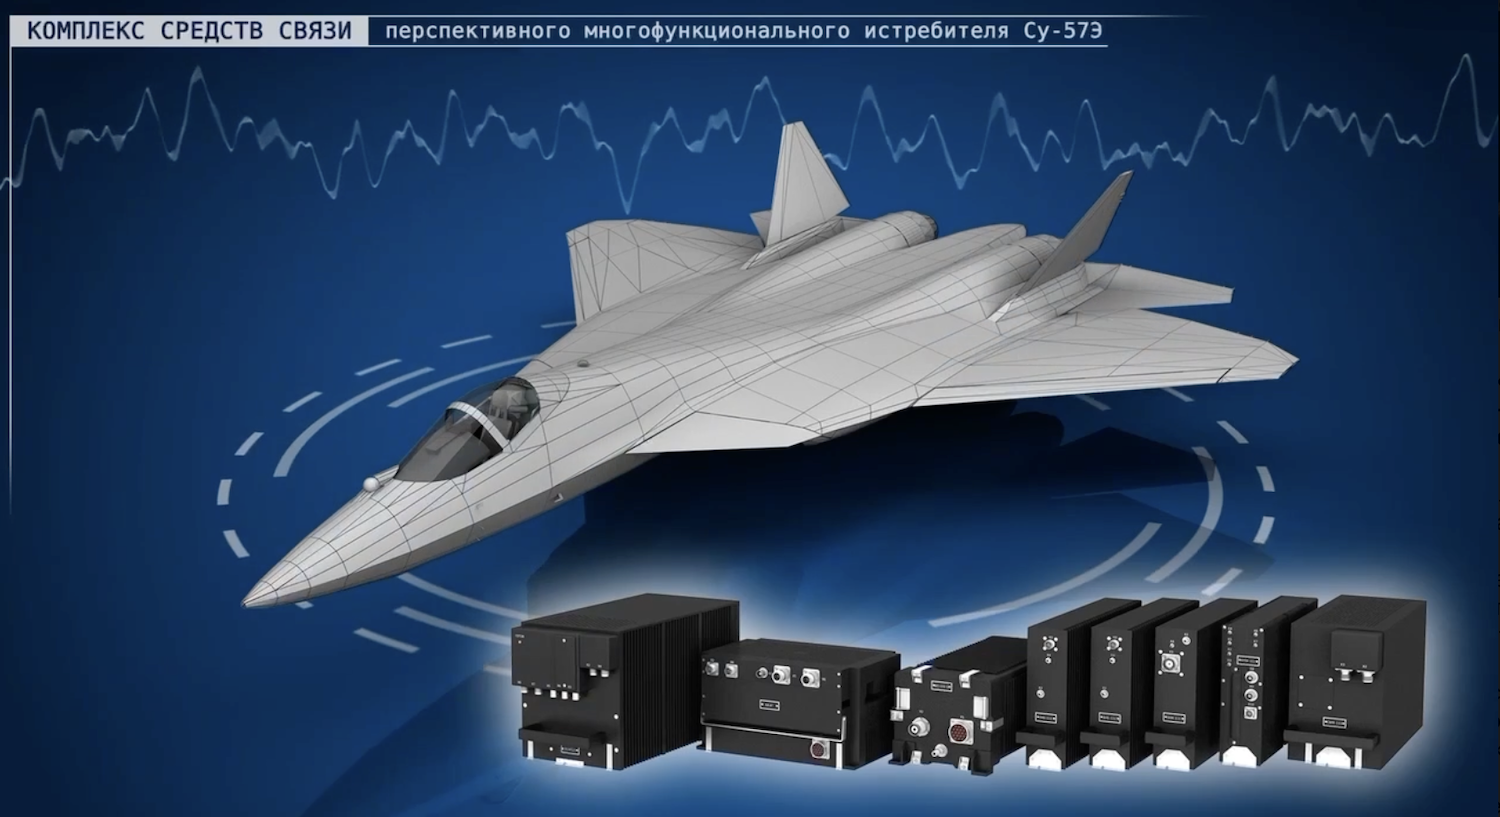 Ruselectronics Demonstrates the Latest Communication Systems for Fighters at the Dubai Airshow